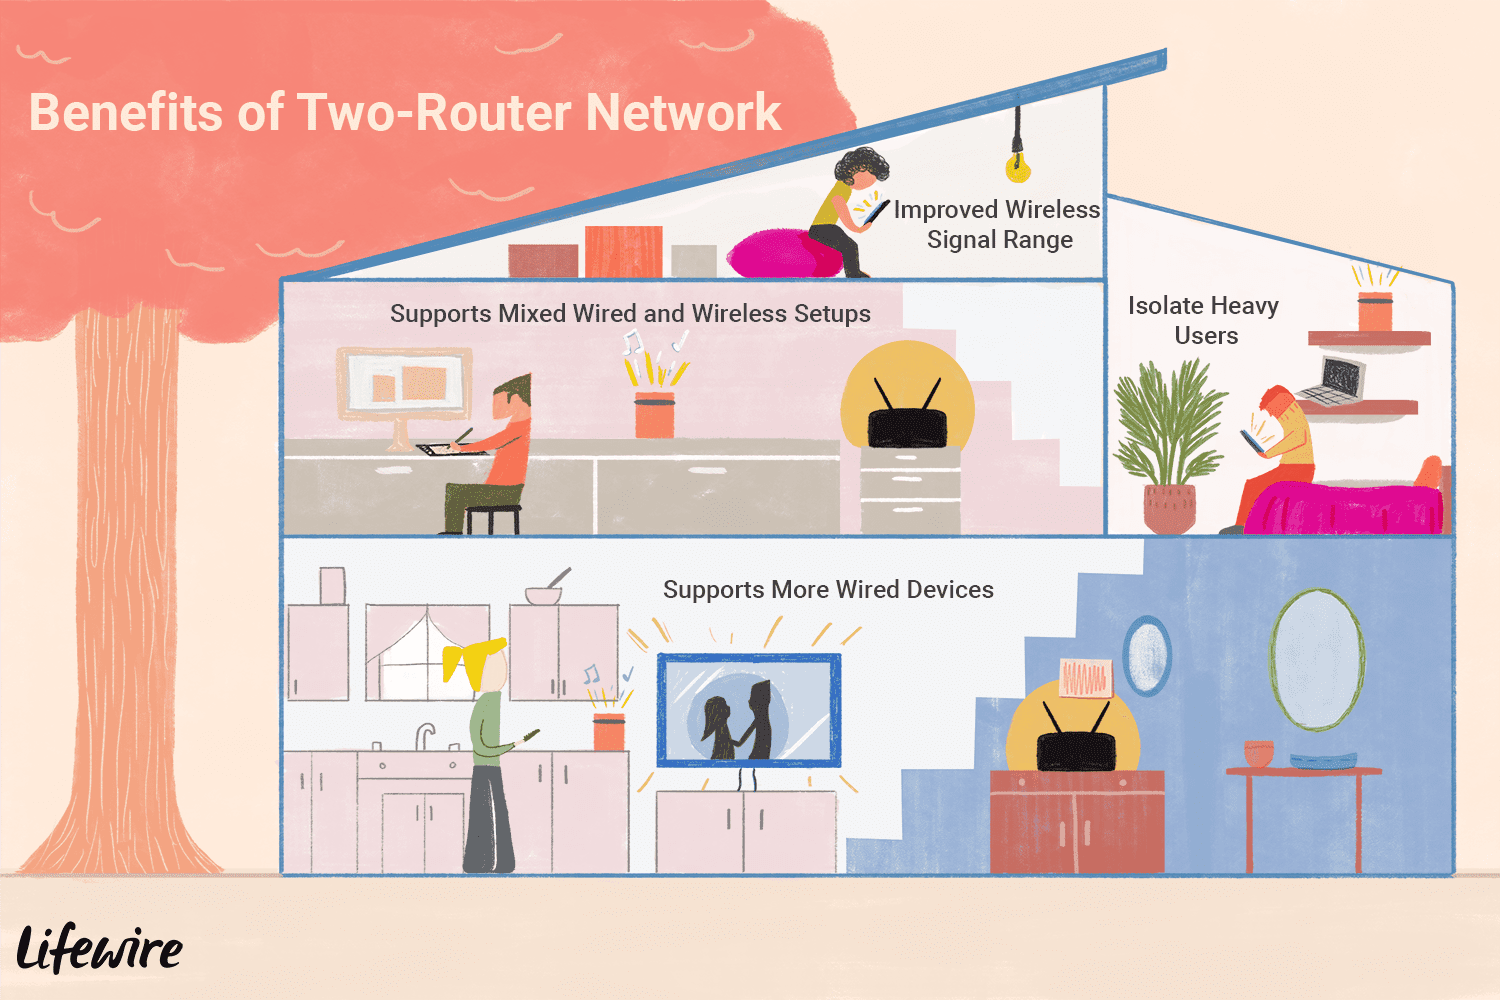 can two routers be used on the same home network 818064 final 5c4a4a9746e0fb000185b55f